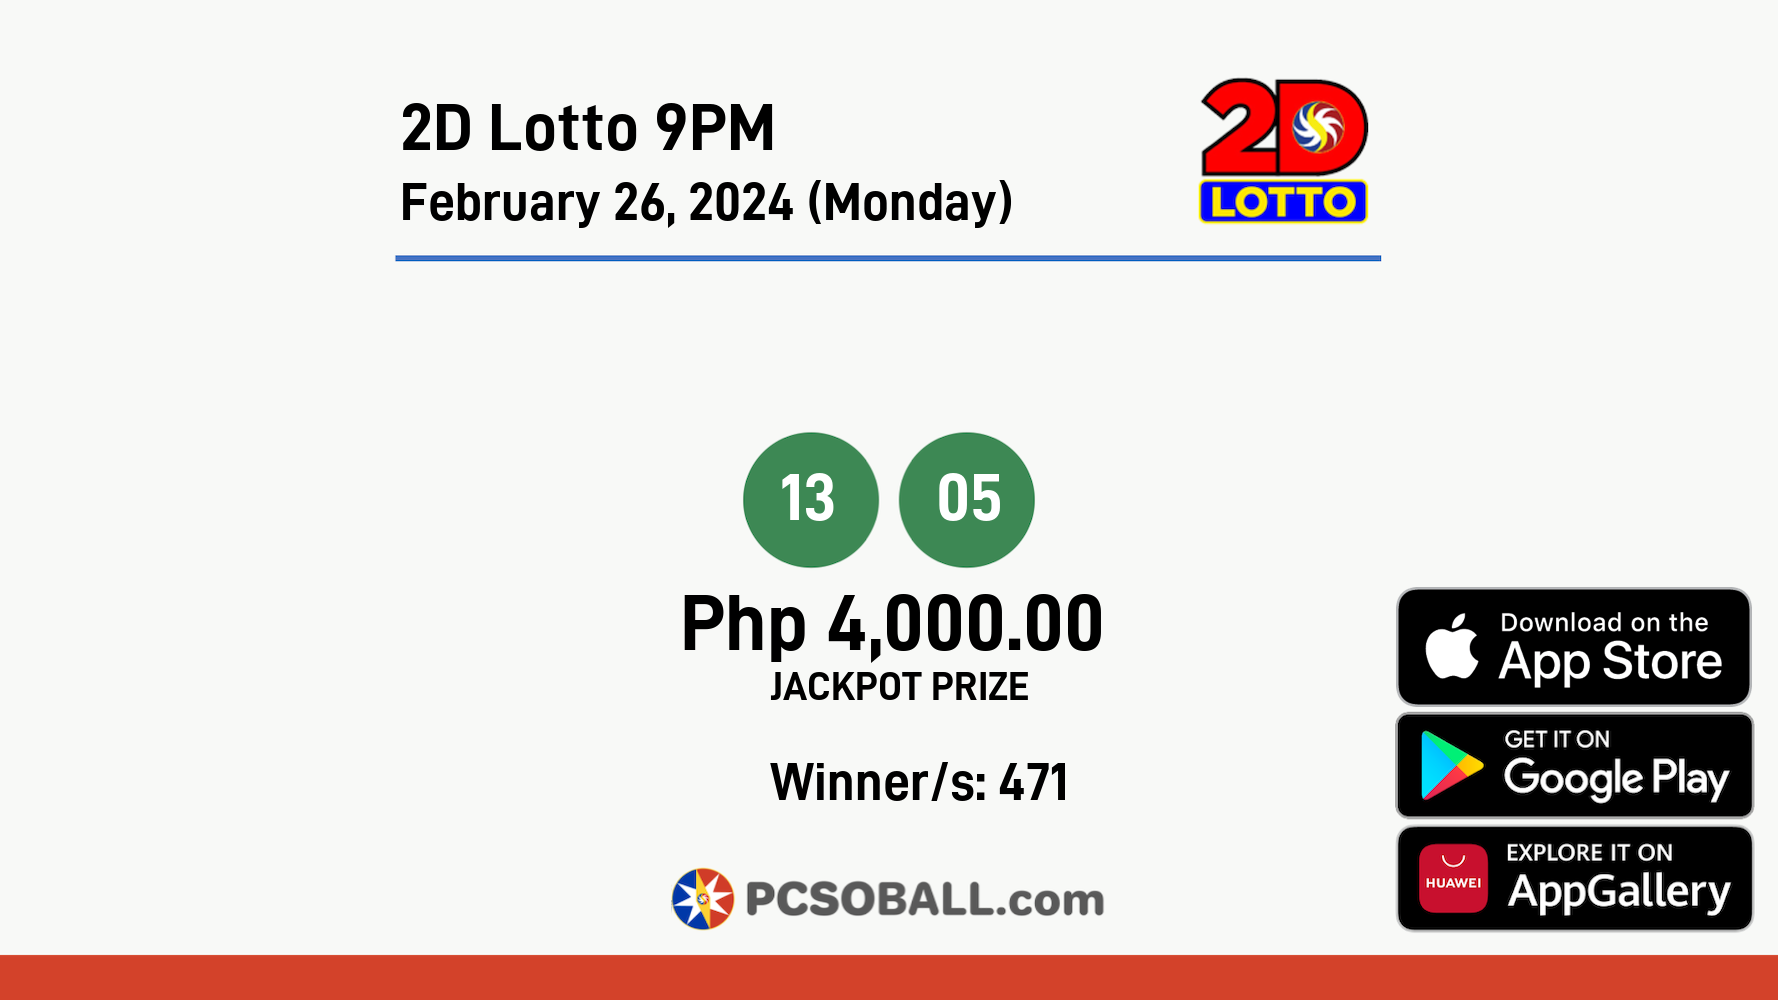 2D Lotto 9PM February 26, 2024 (Monday) Result